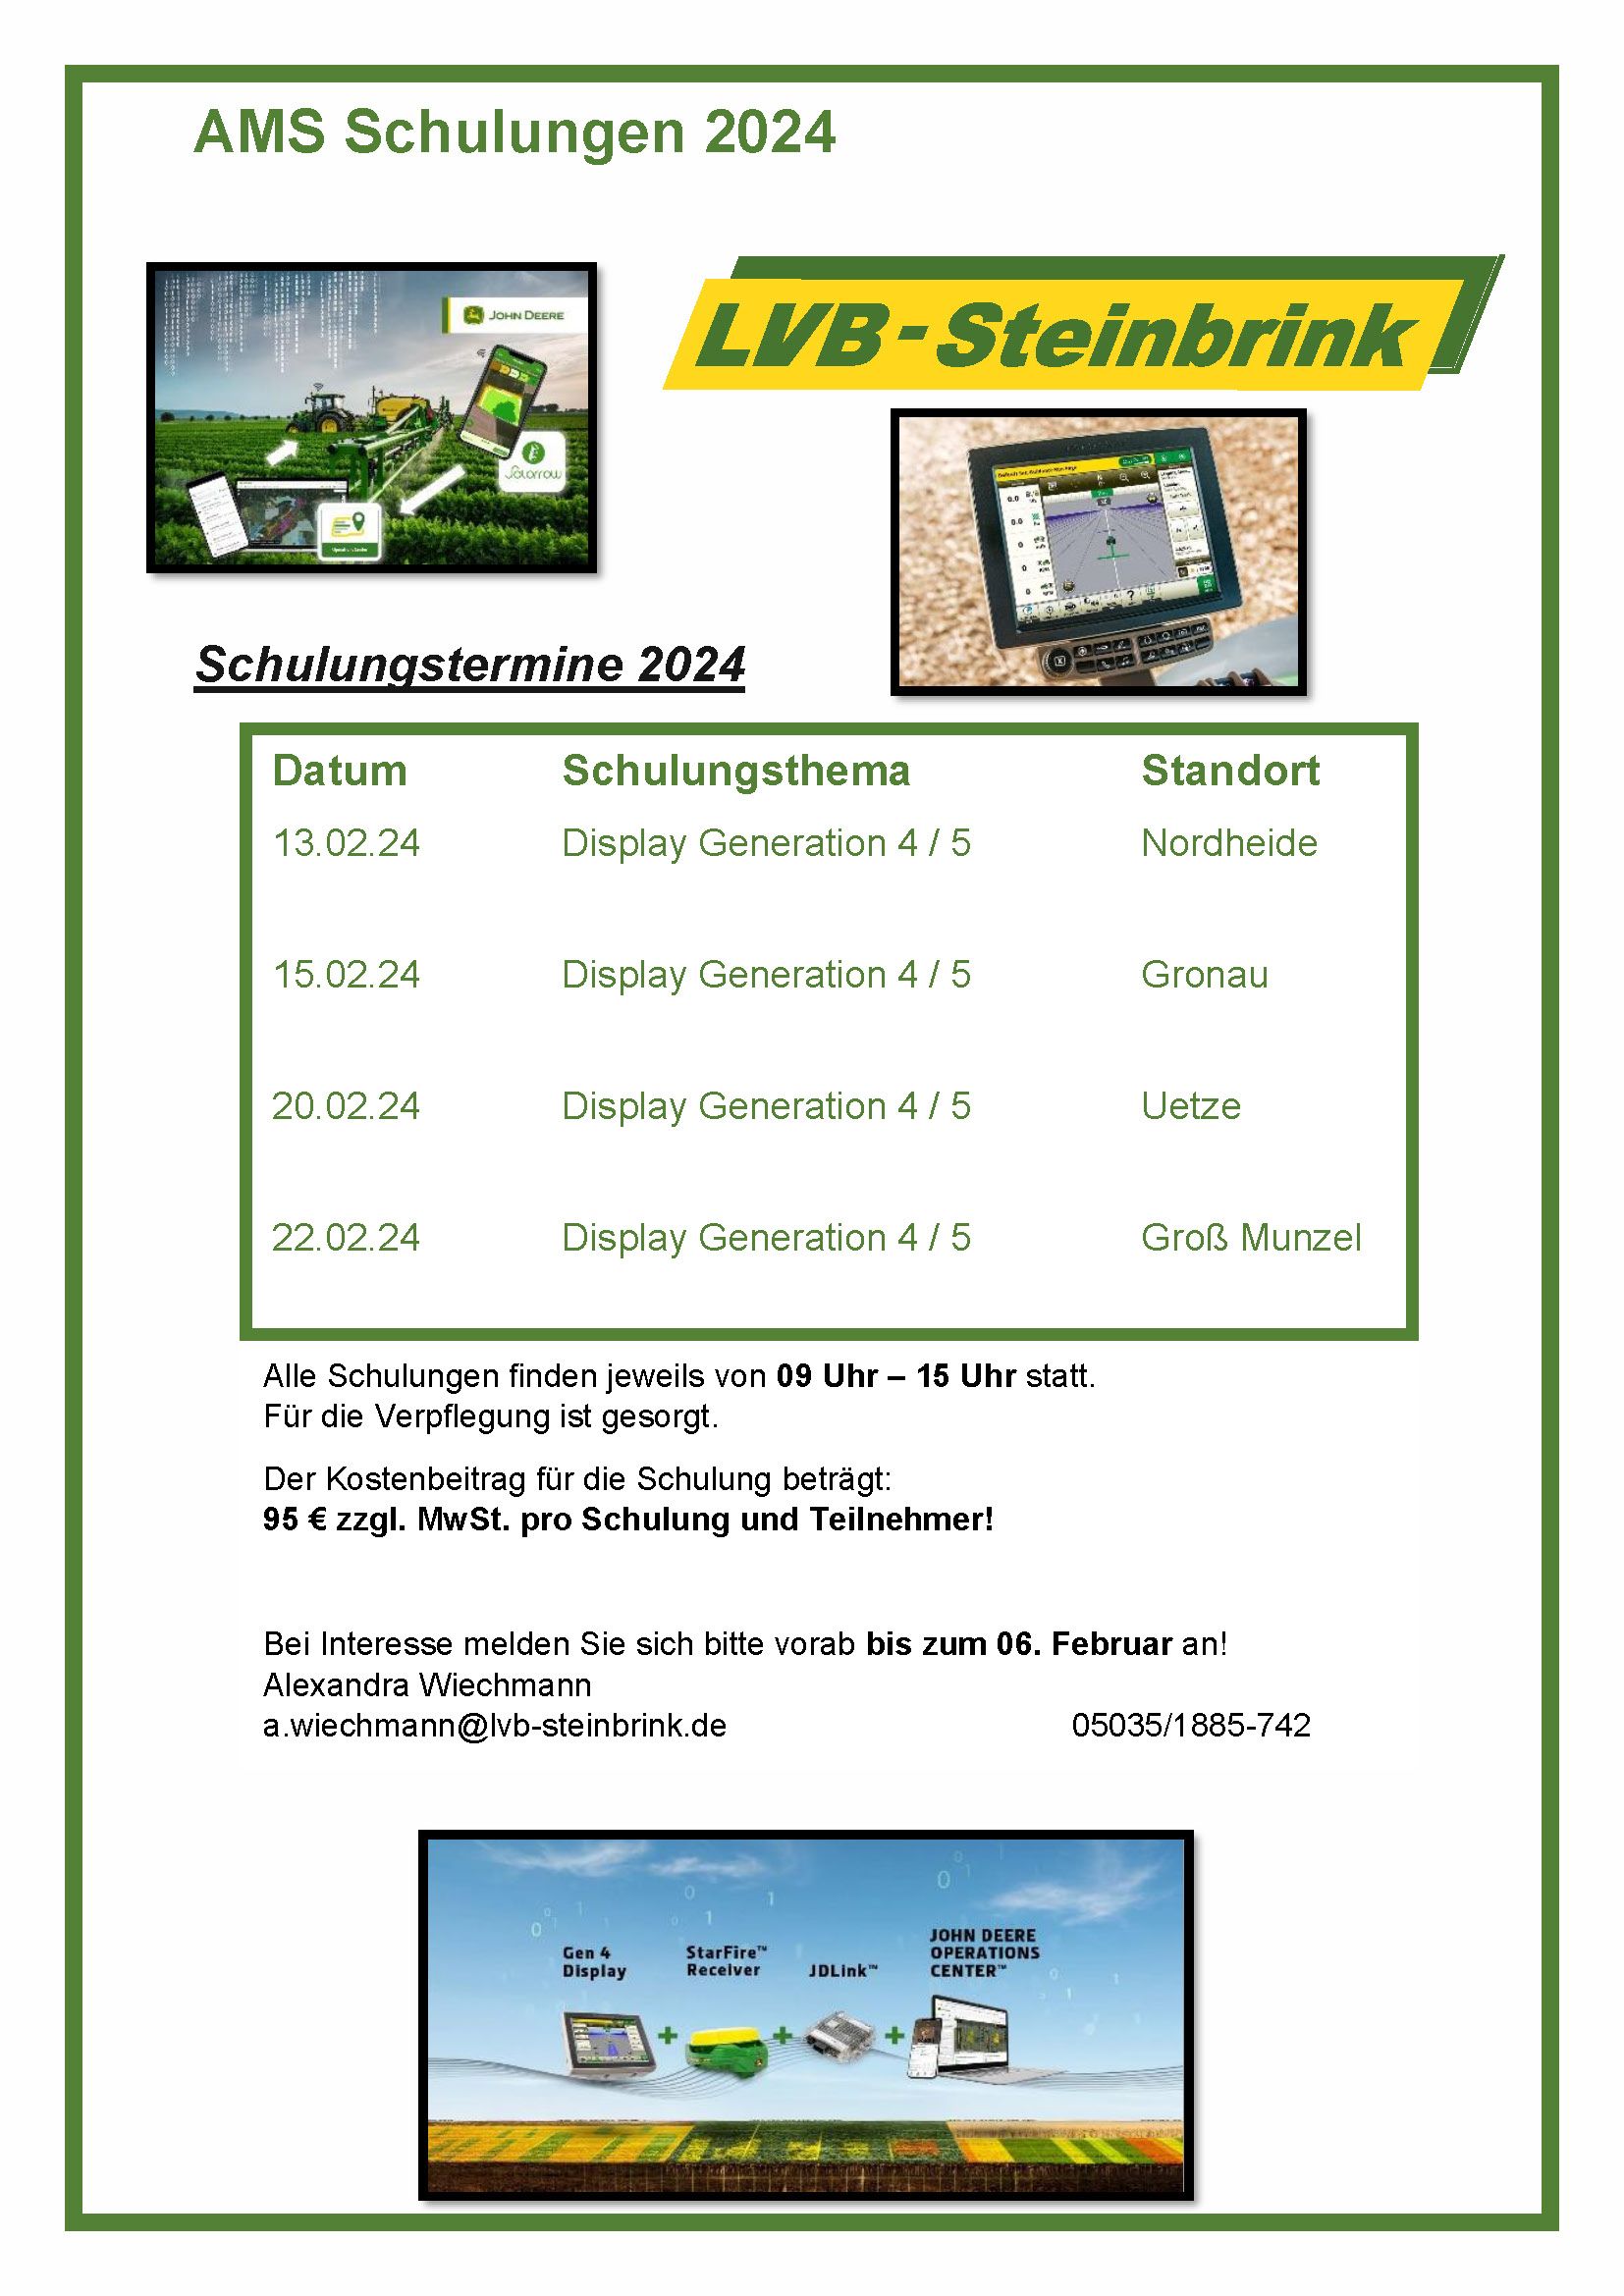 AMS_Schulung_2024_Flyer